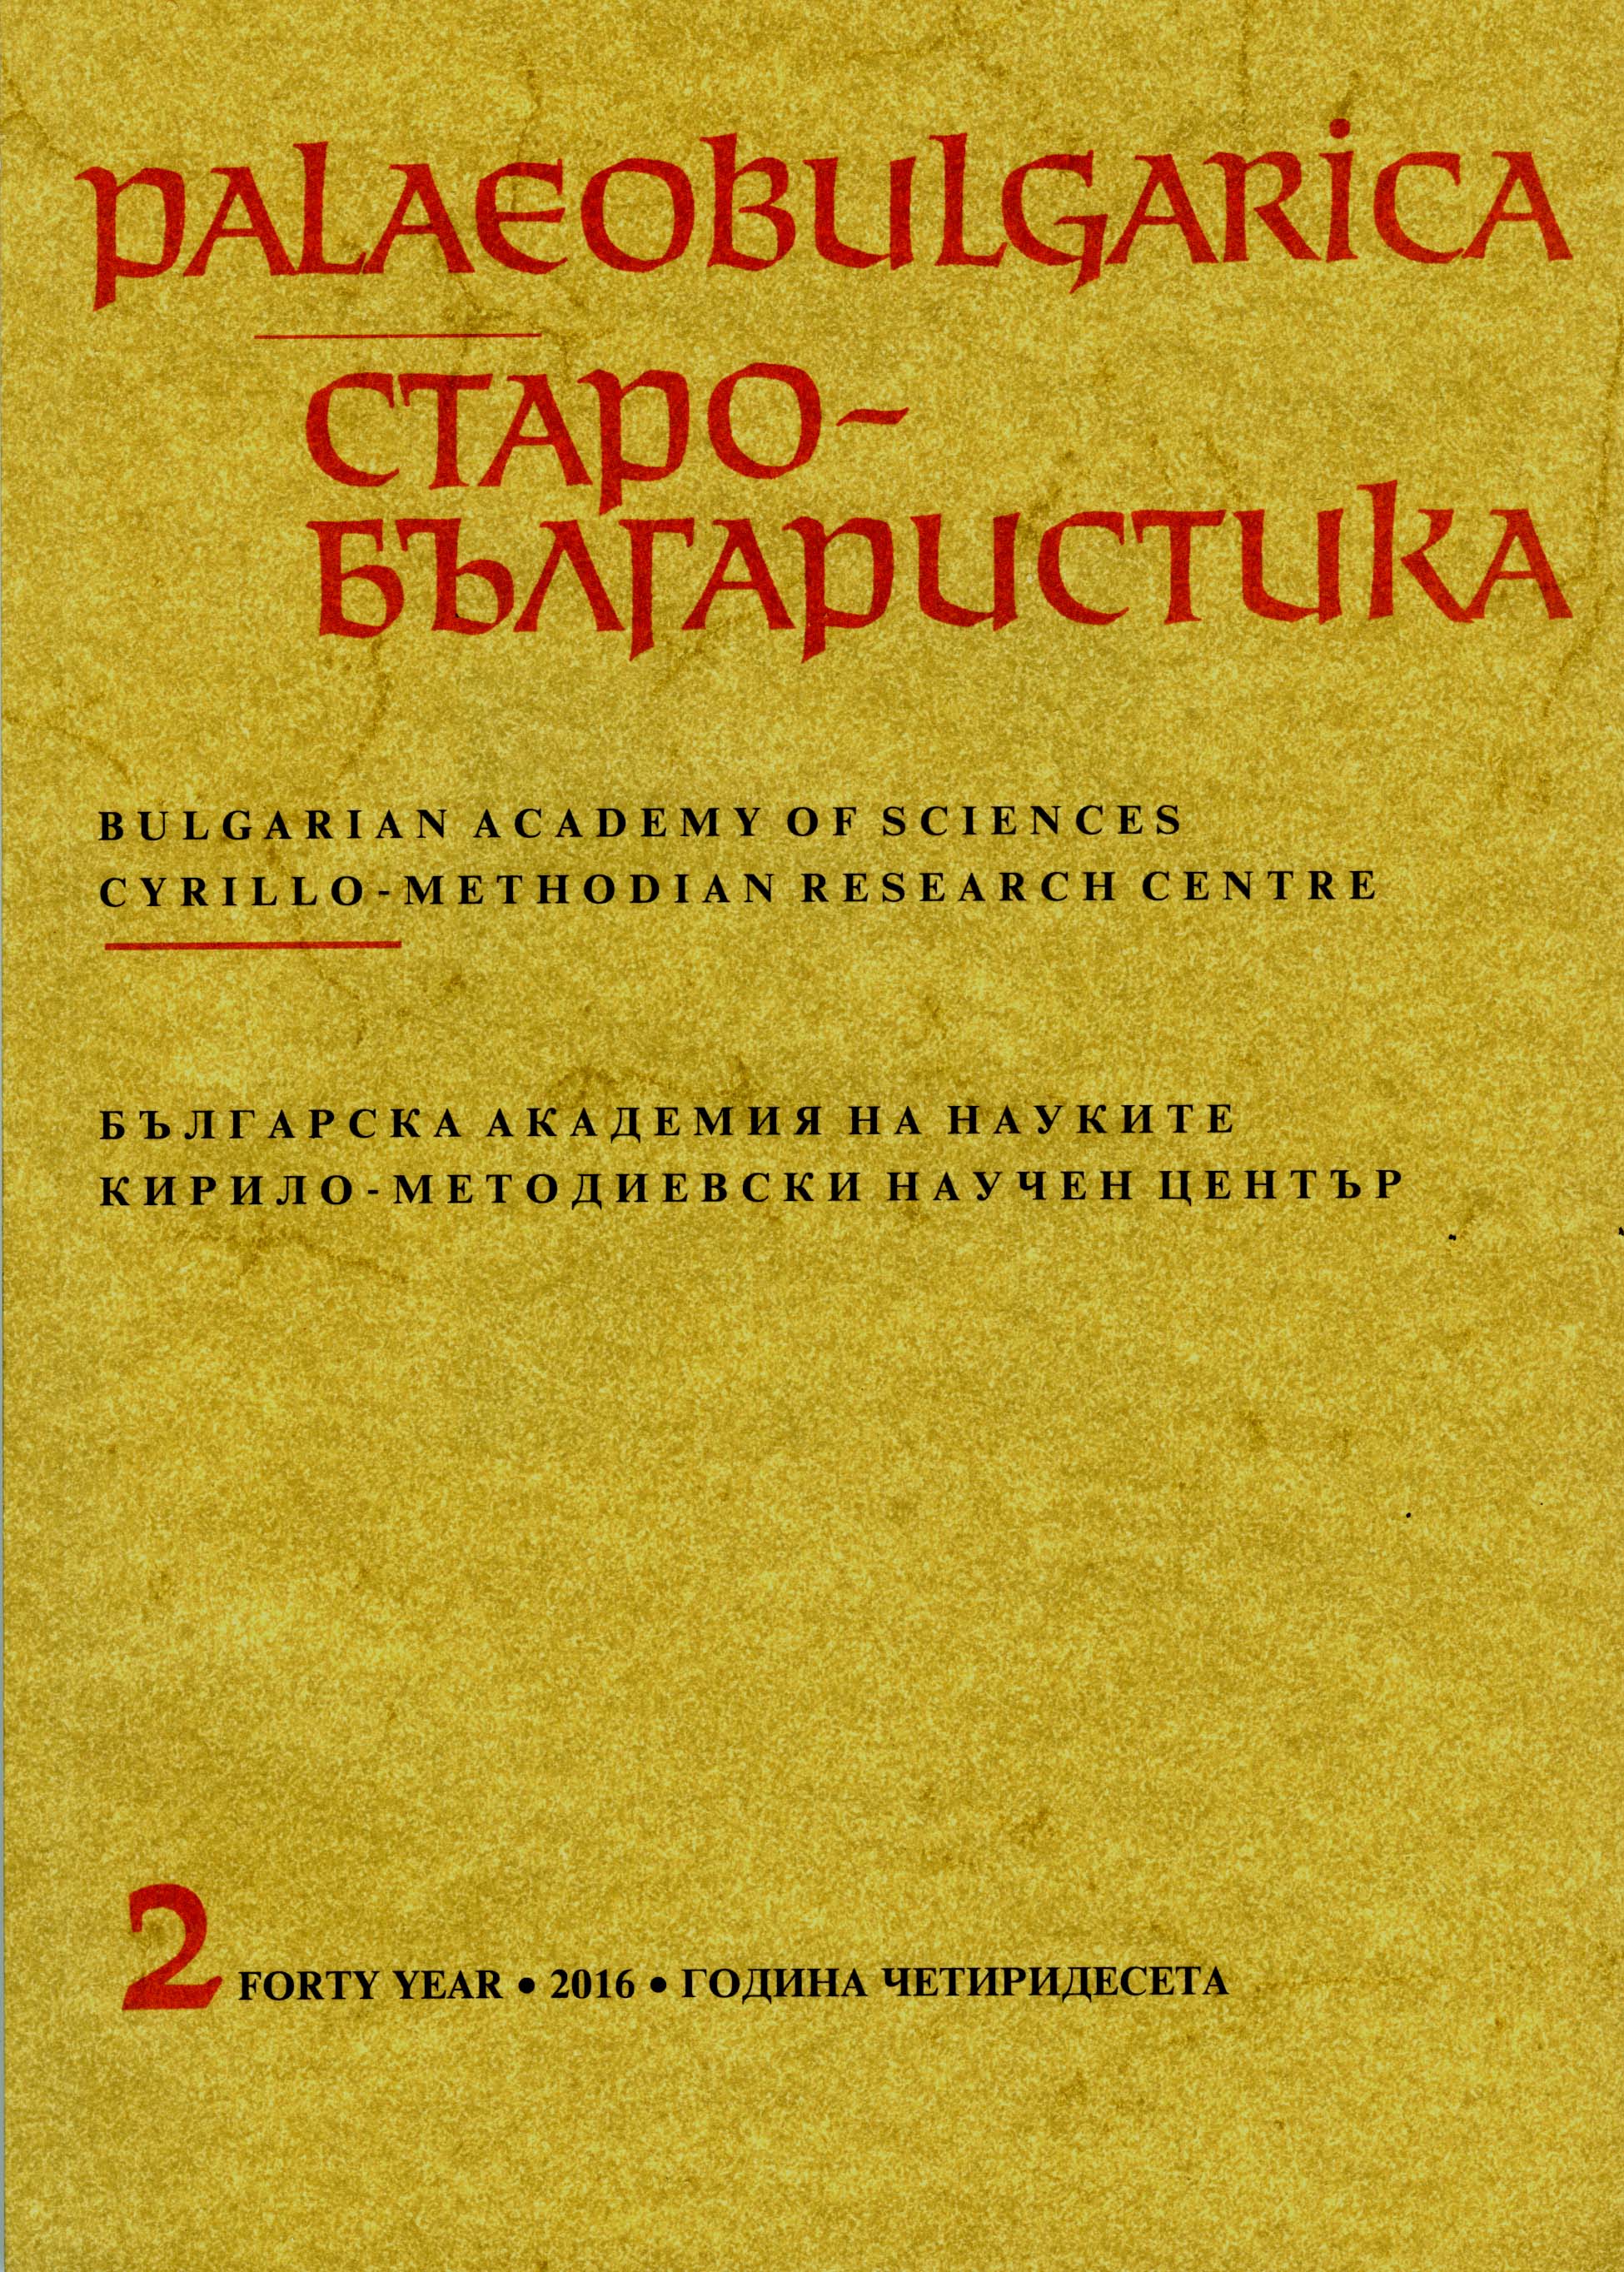 Samuil's Bulgaria and the Situation in Southeastern Europe According to Modern Byzantine and Medieval Studies Cover Image